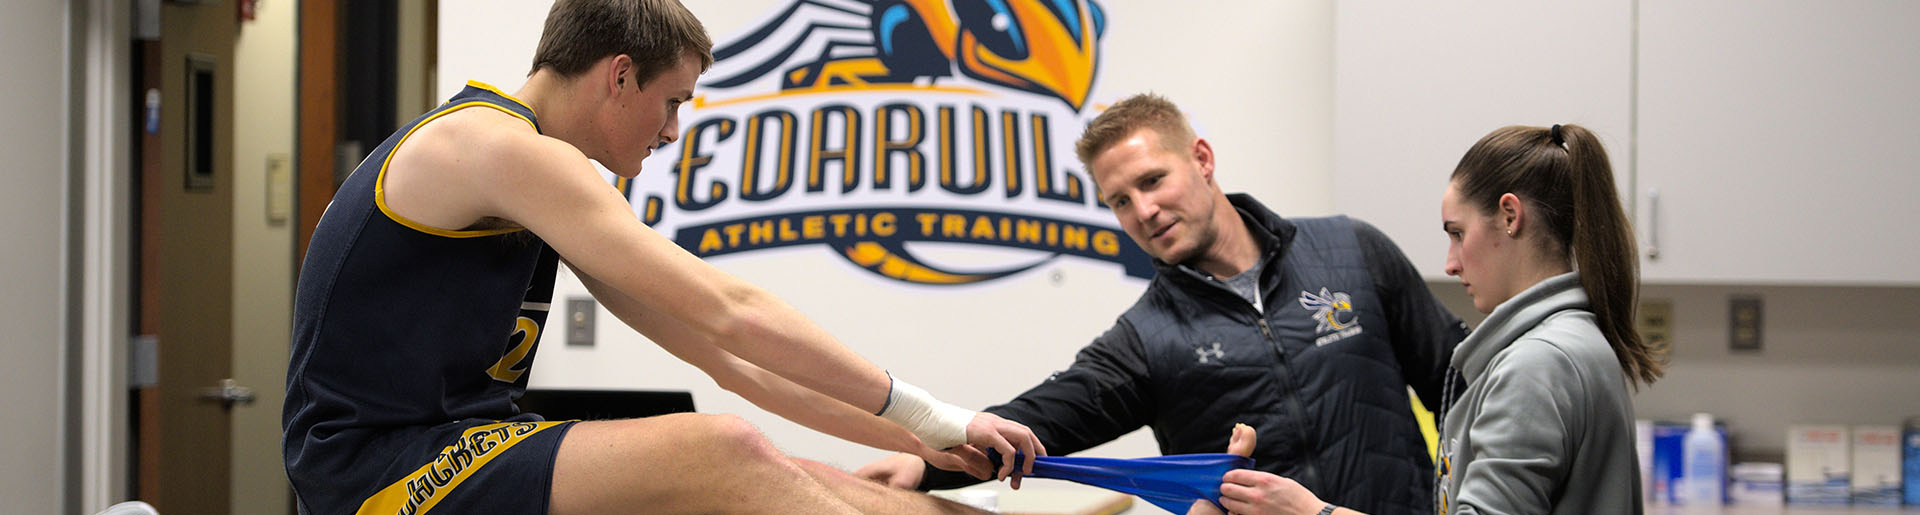 Cedarville University athletic trainer Wes Stephens and a student trainer help a basketball player in the training room.